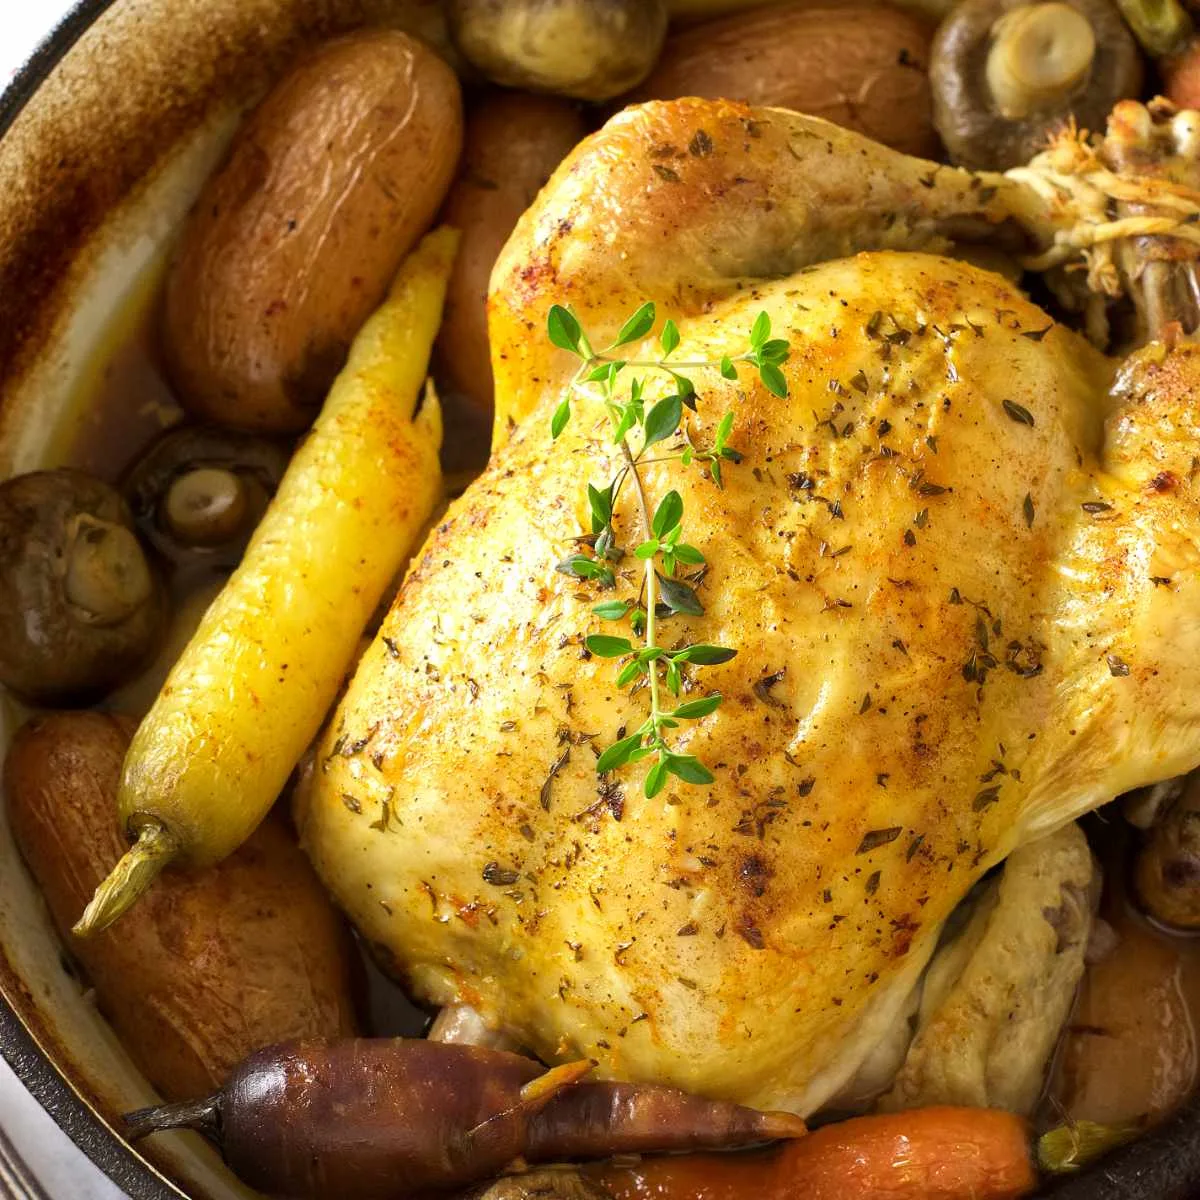 A roasted dutch oven whole chicken with potatoes, carrots, and mushrooms.